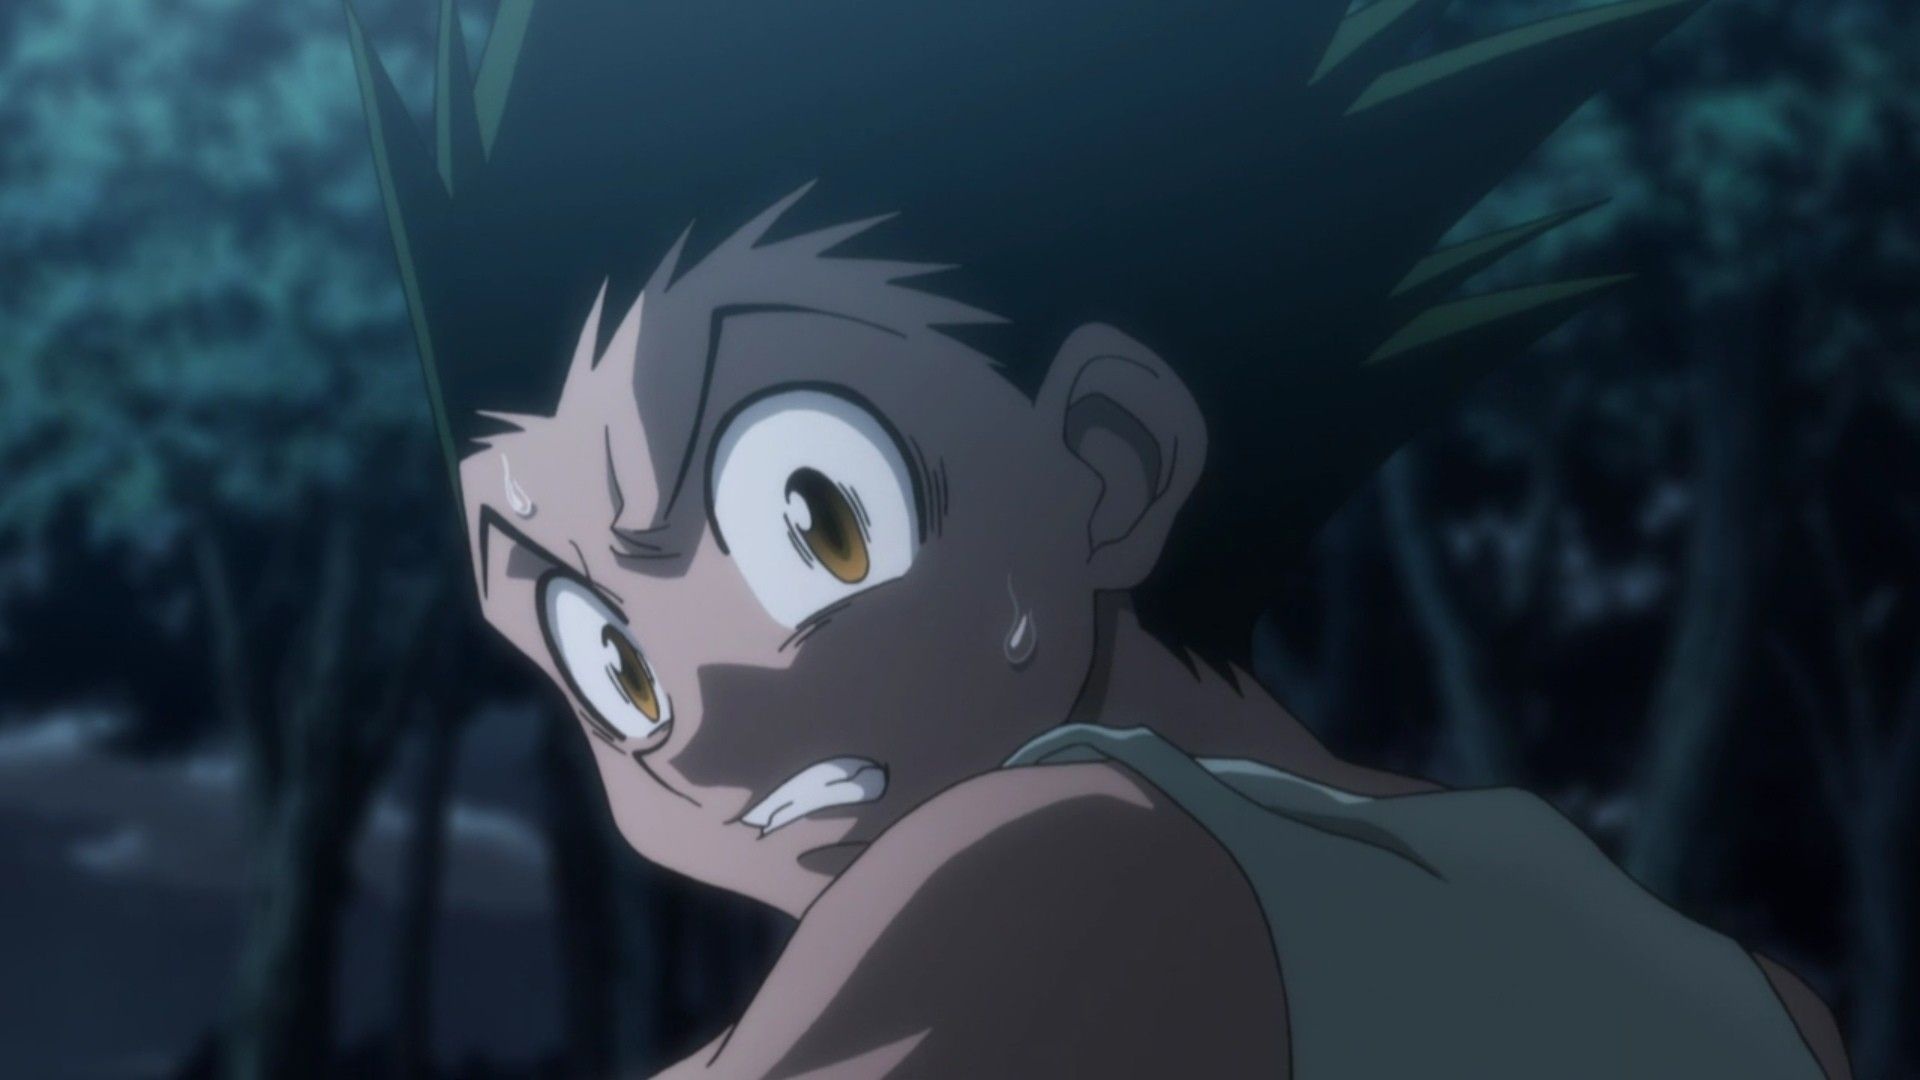 Gon Freecss: A Japanese anime, The strongest and most used attack, Rock. 1920x1080 Full HD Wallpaper.